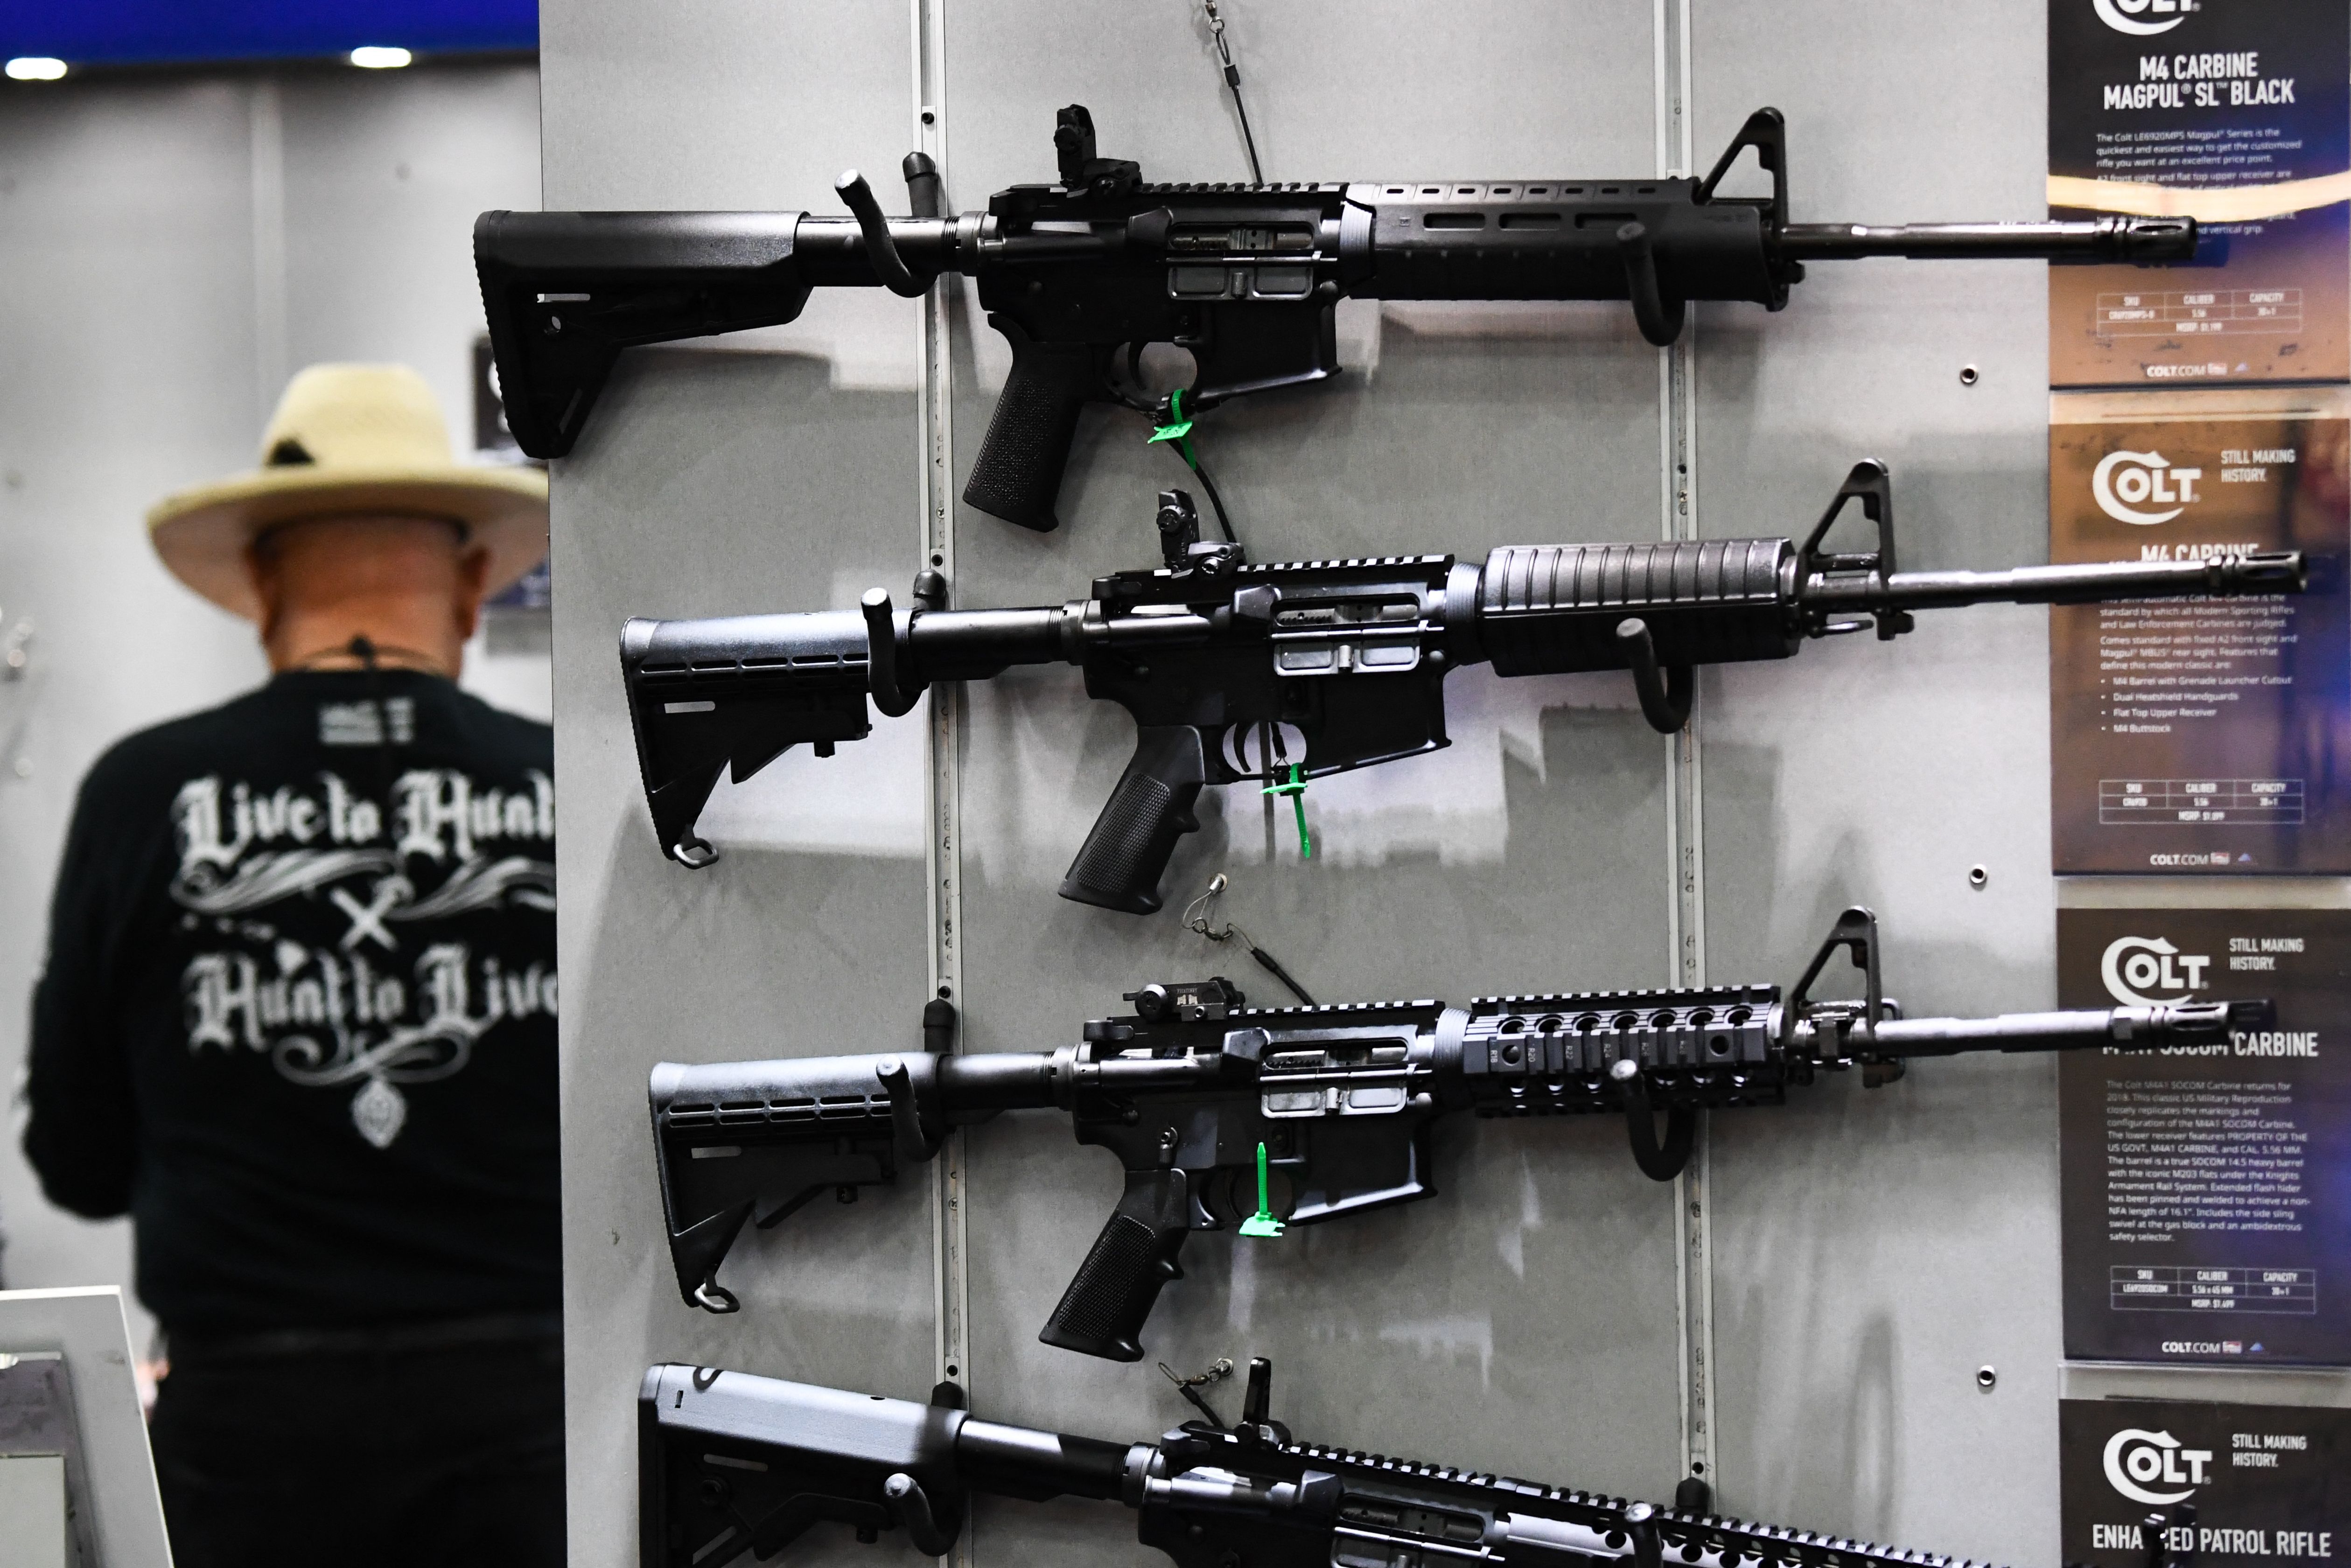 Washington becomes 10th state to ban assault weapons sales